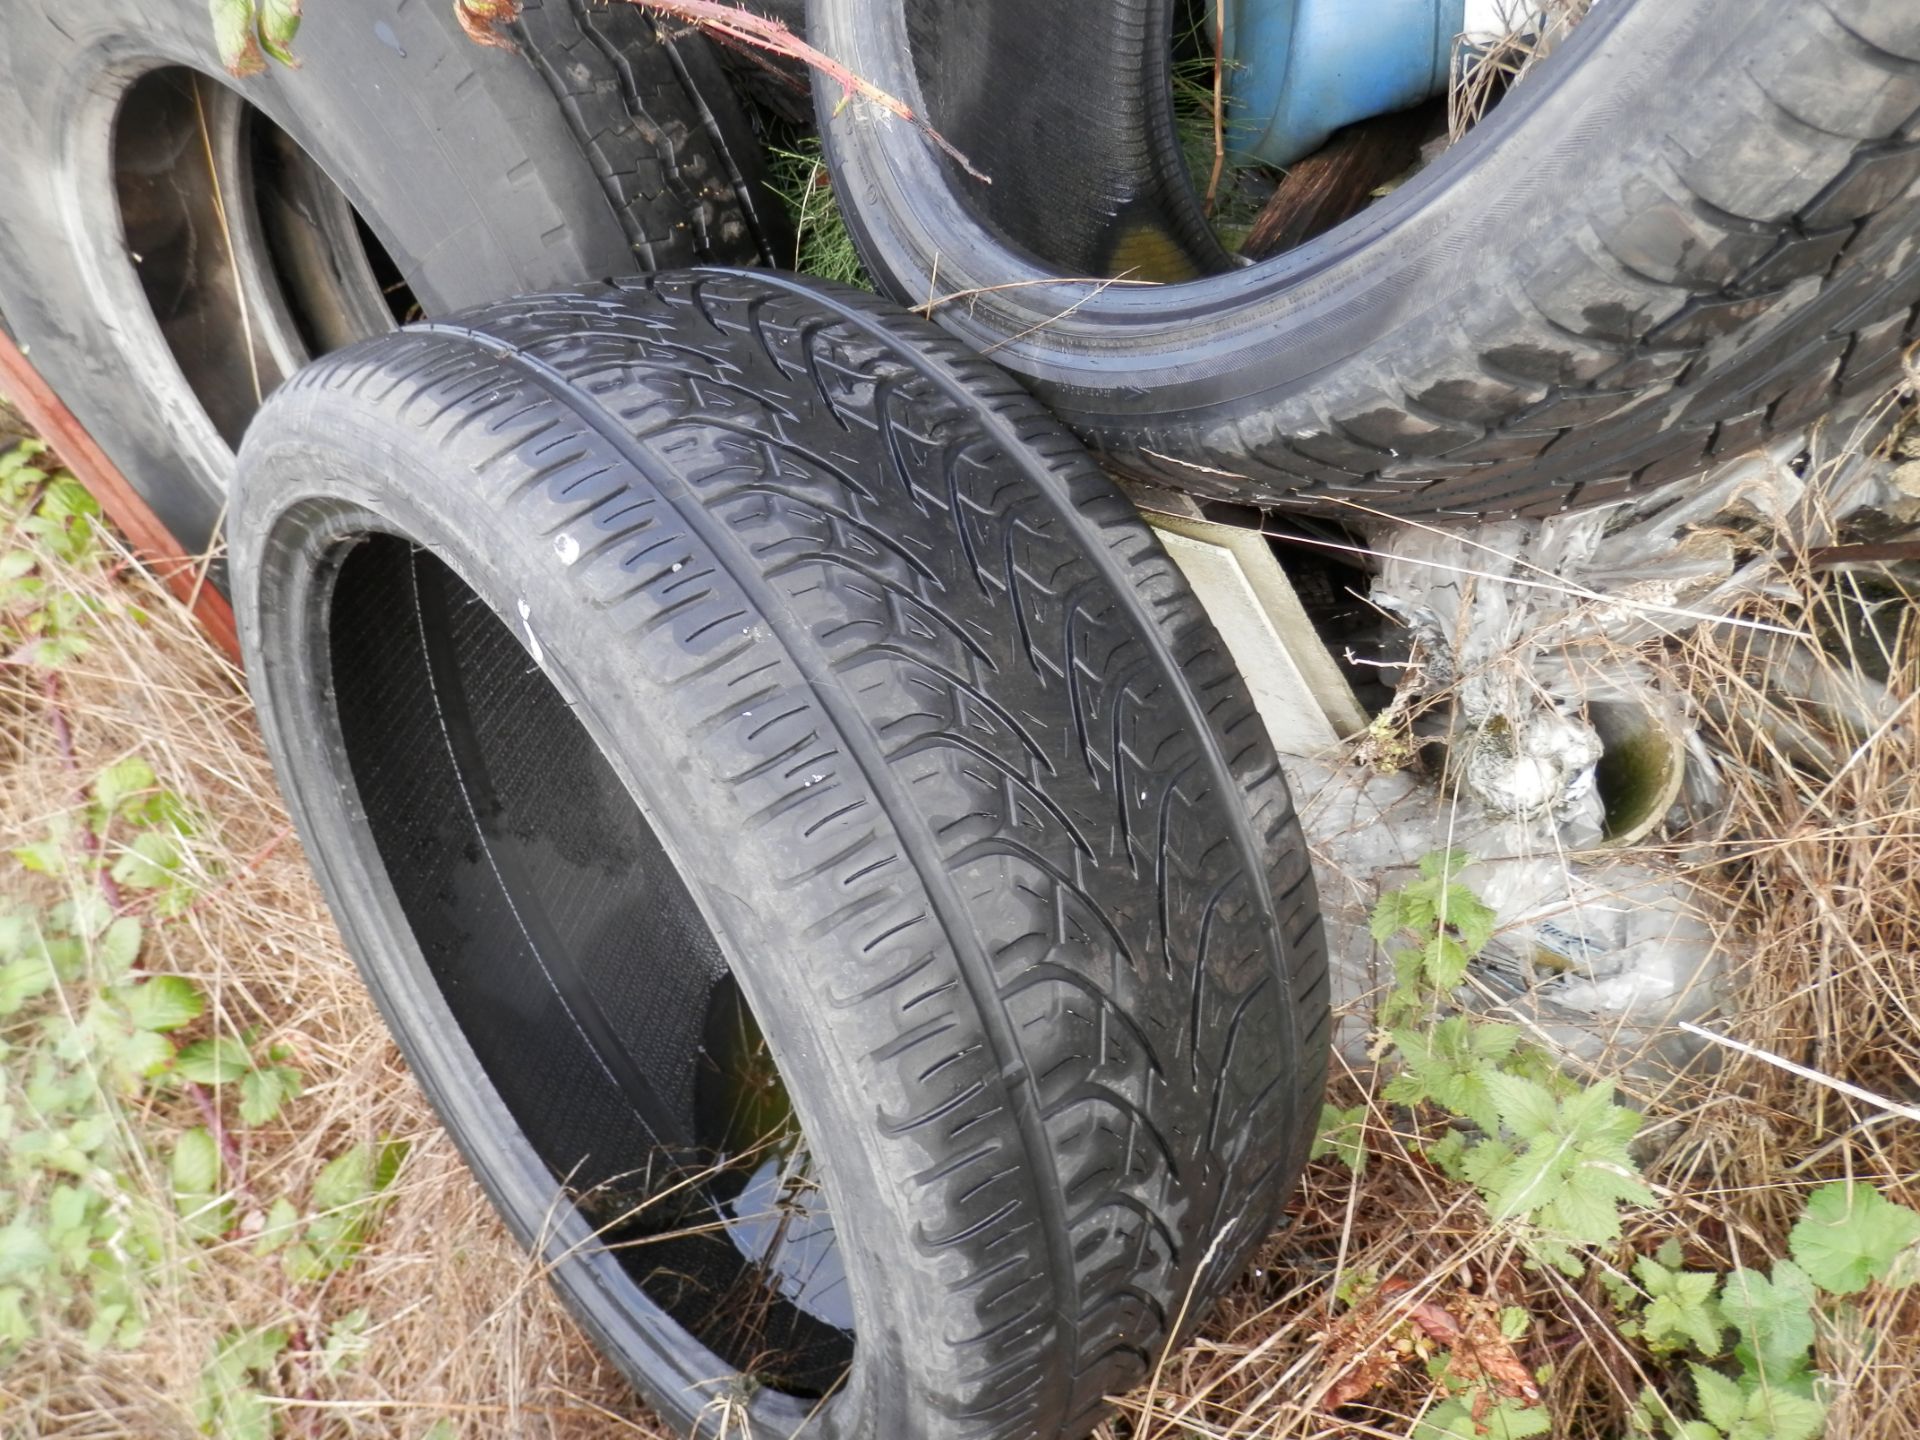 3 CAR GARAGES FULL OF USED, PART WORN TYRES. ASSORTED FROM CAR TO LORRY TYRES. POSSIBLY 800+ £10 !! - Image 6 of 8